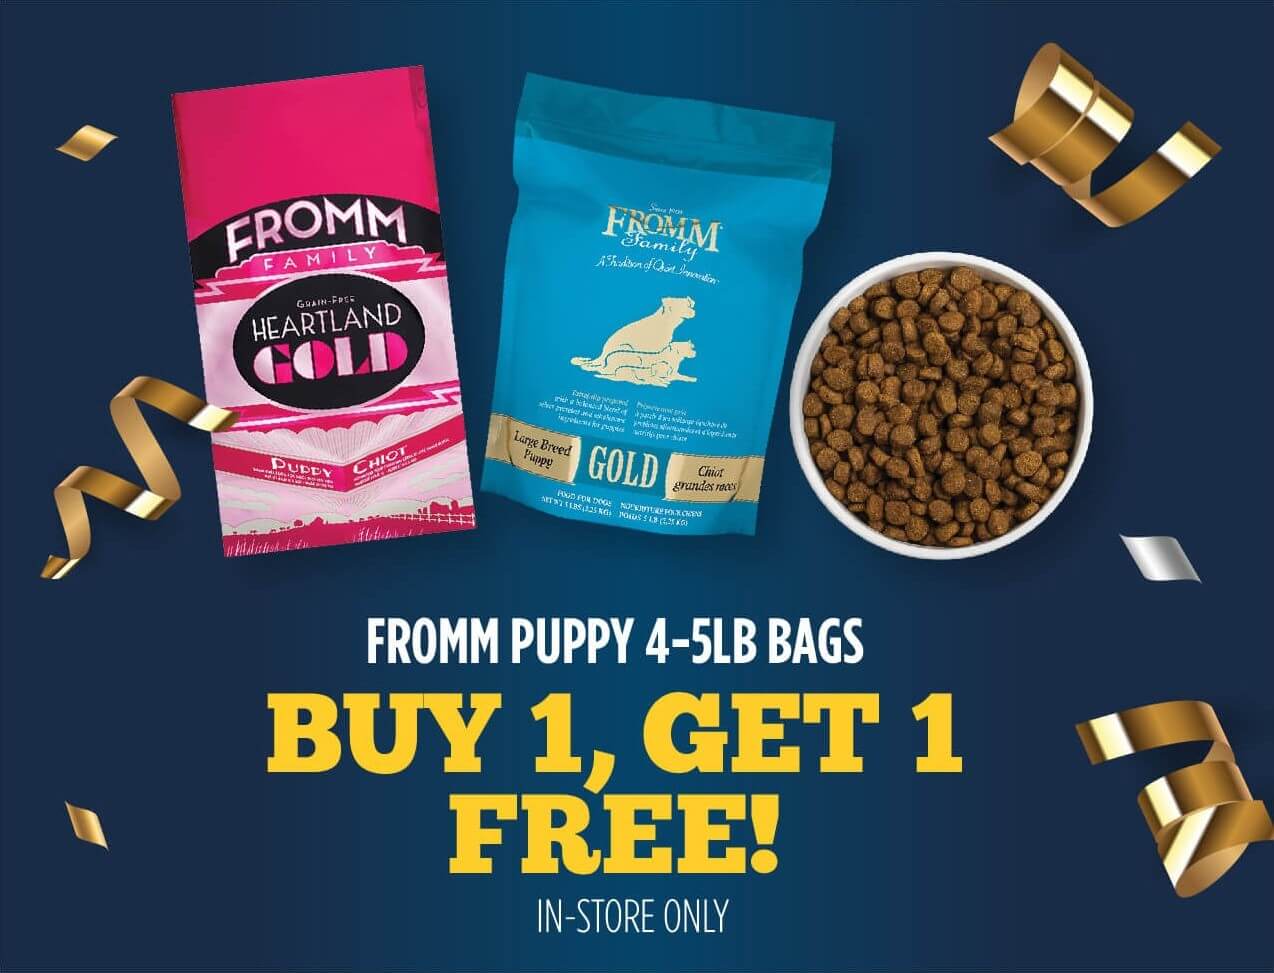 Buy 1 Get 1 Free Fromm Puppy 4-5lb bags. * In Store Only